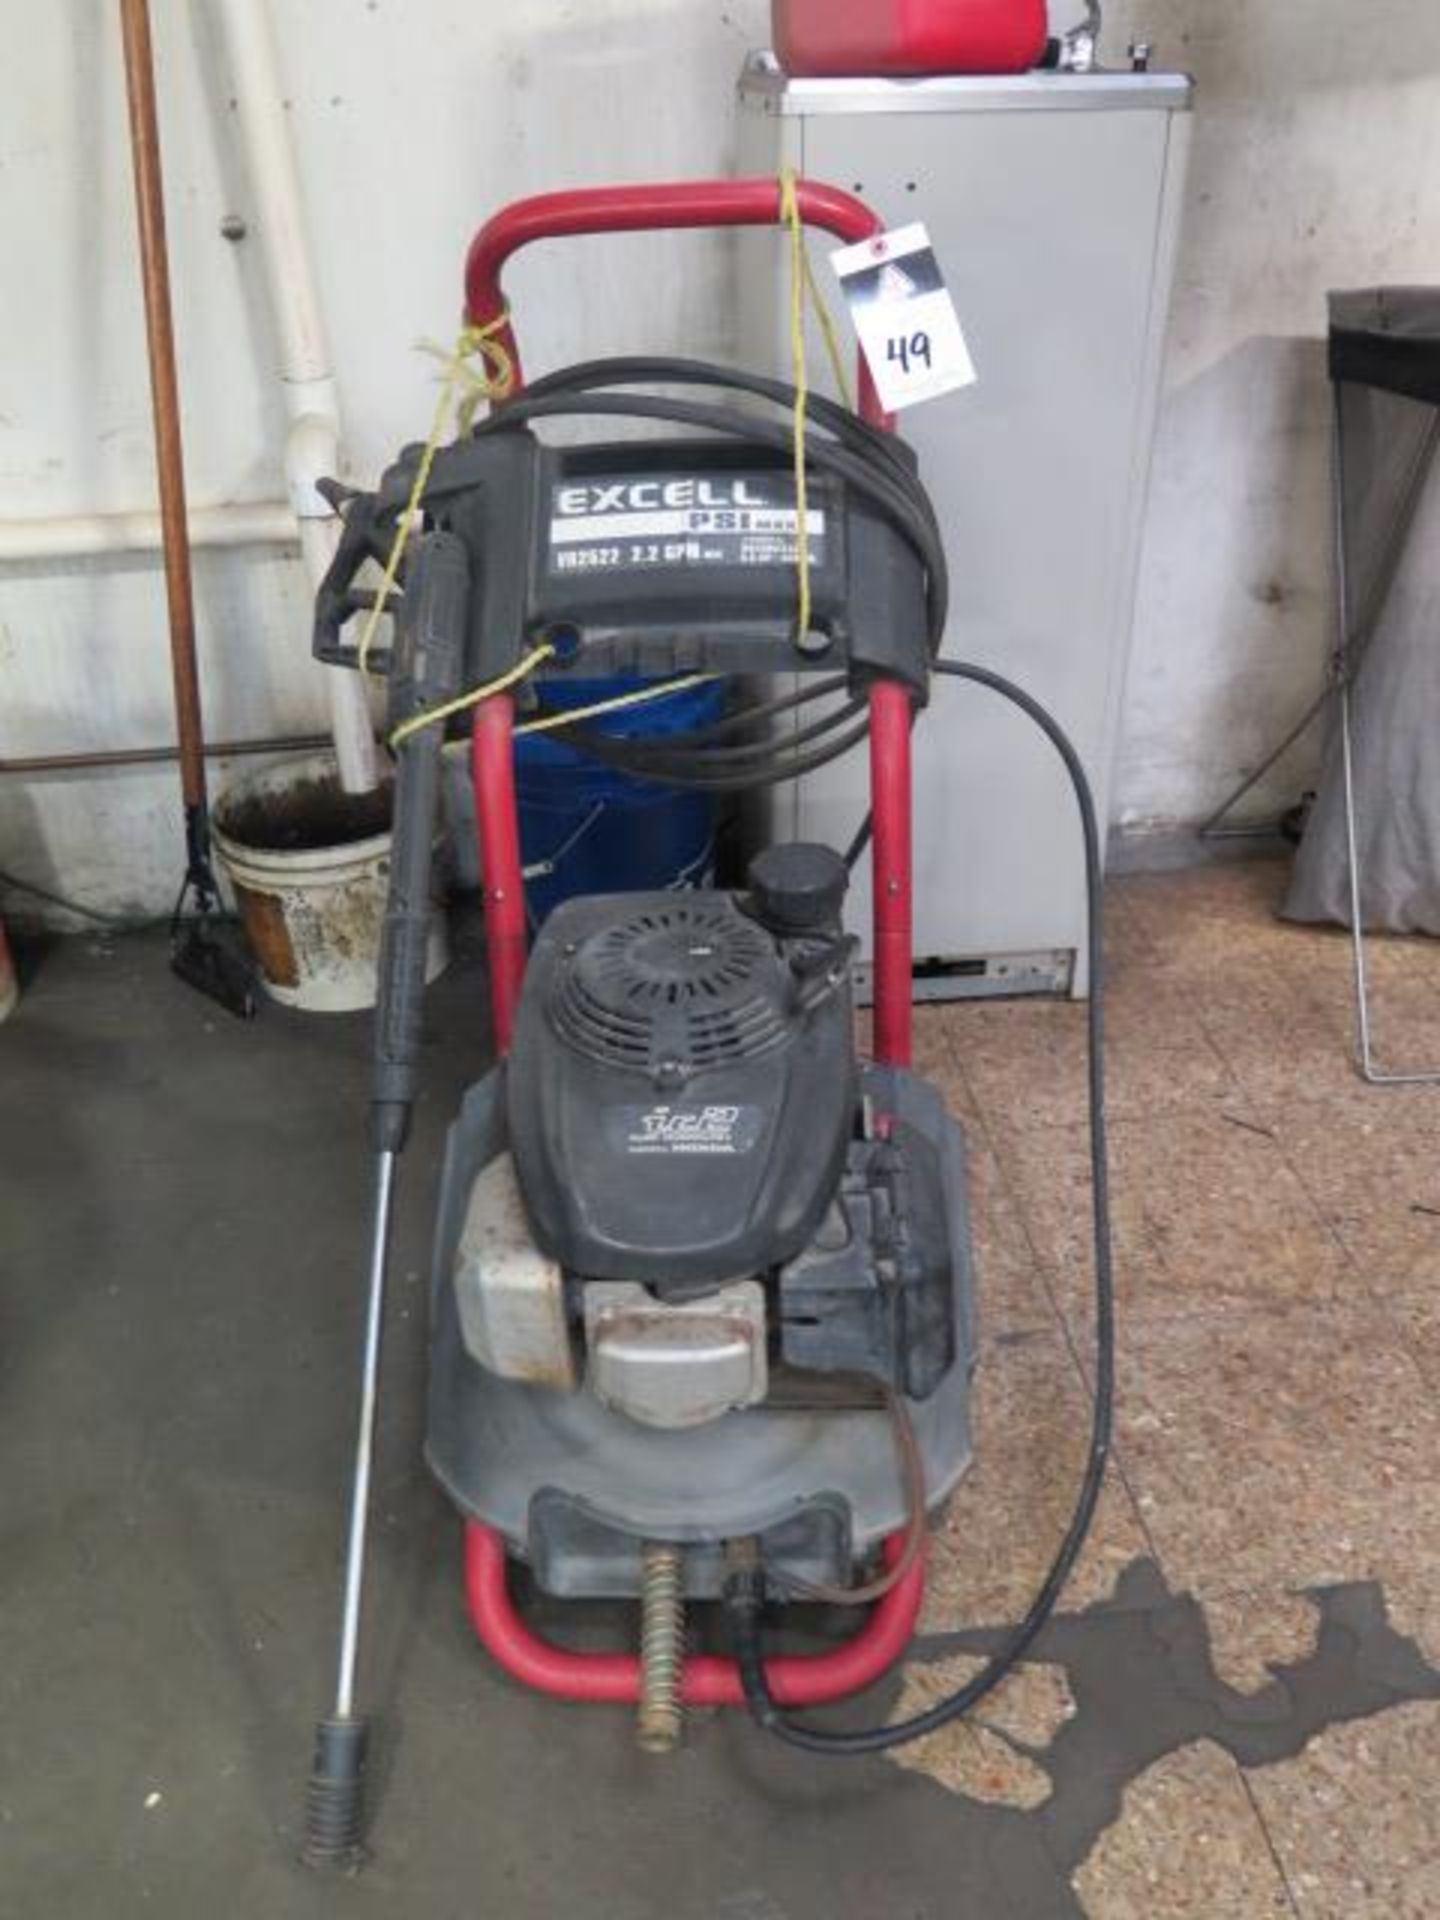 Excell VR2522 5.5Hp Pressure Washer (SOLD AS-IS - NO WARRANTY)